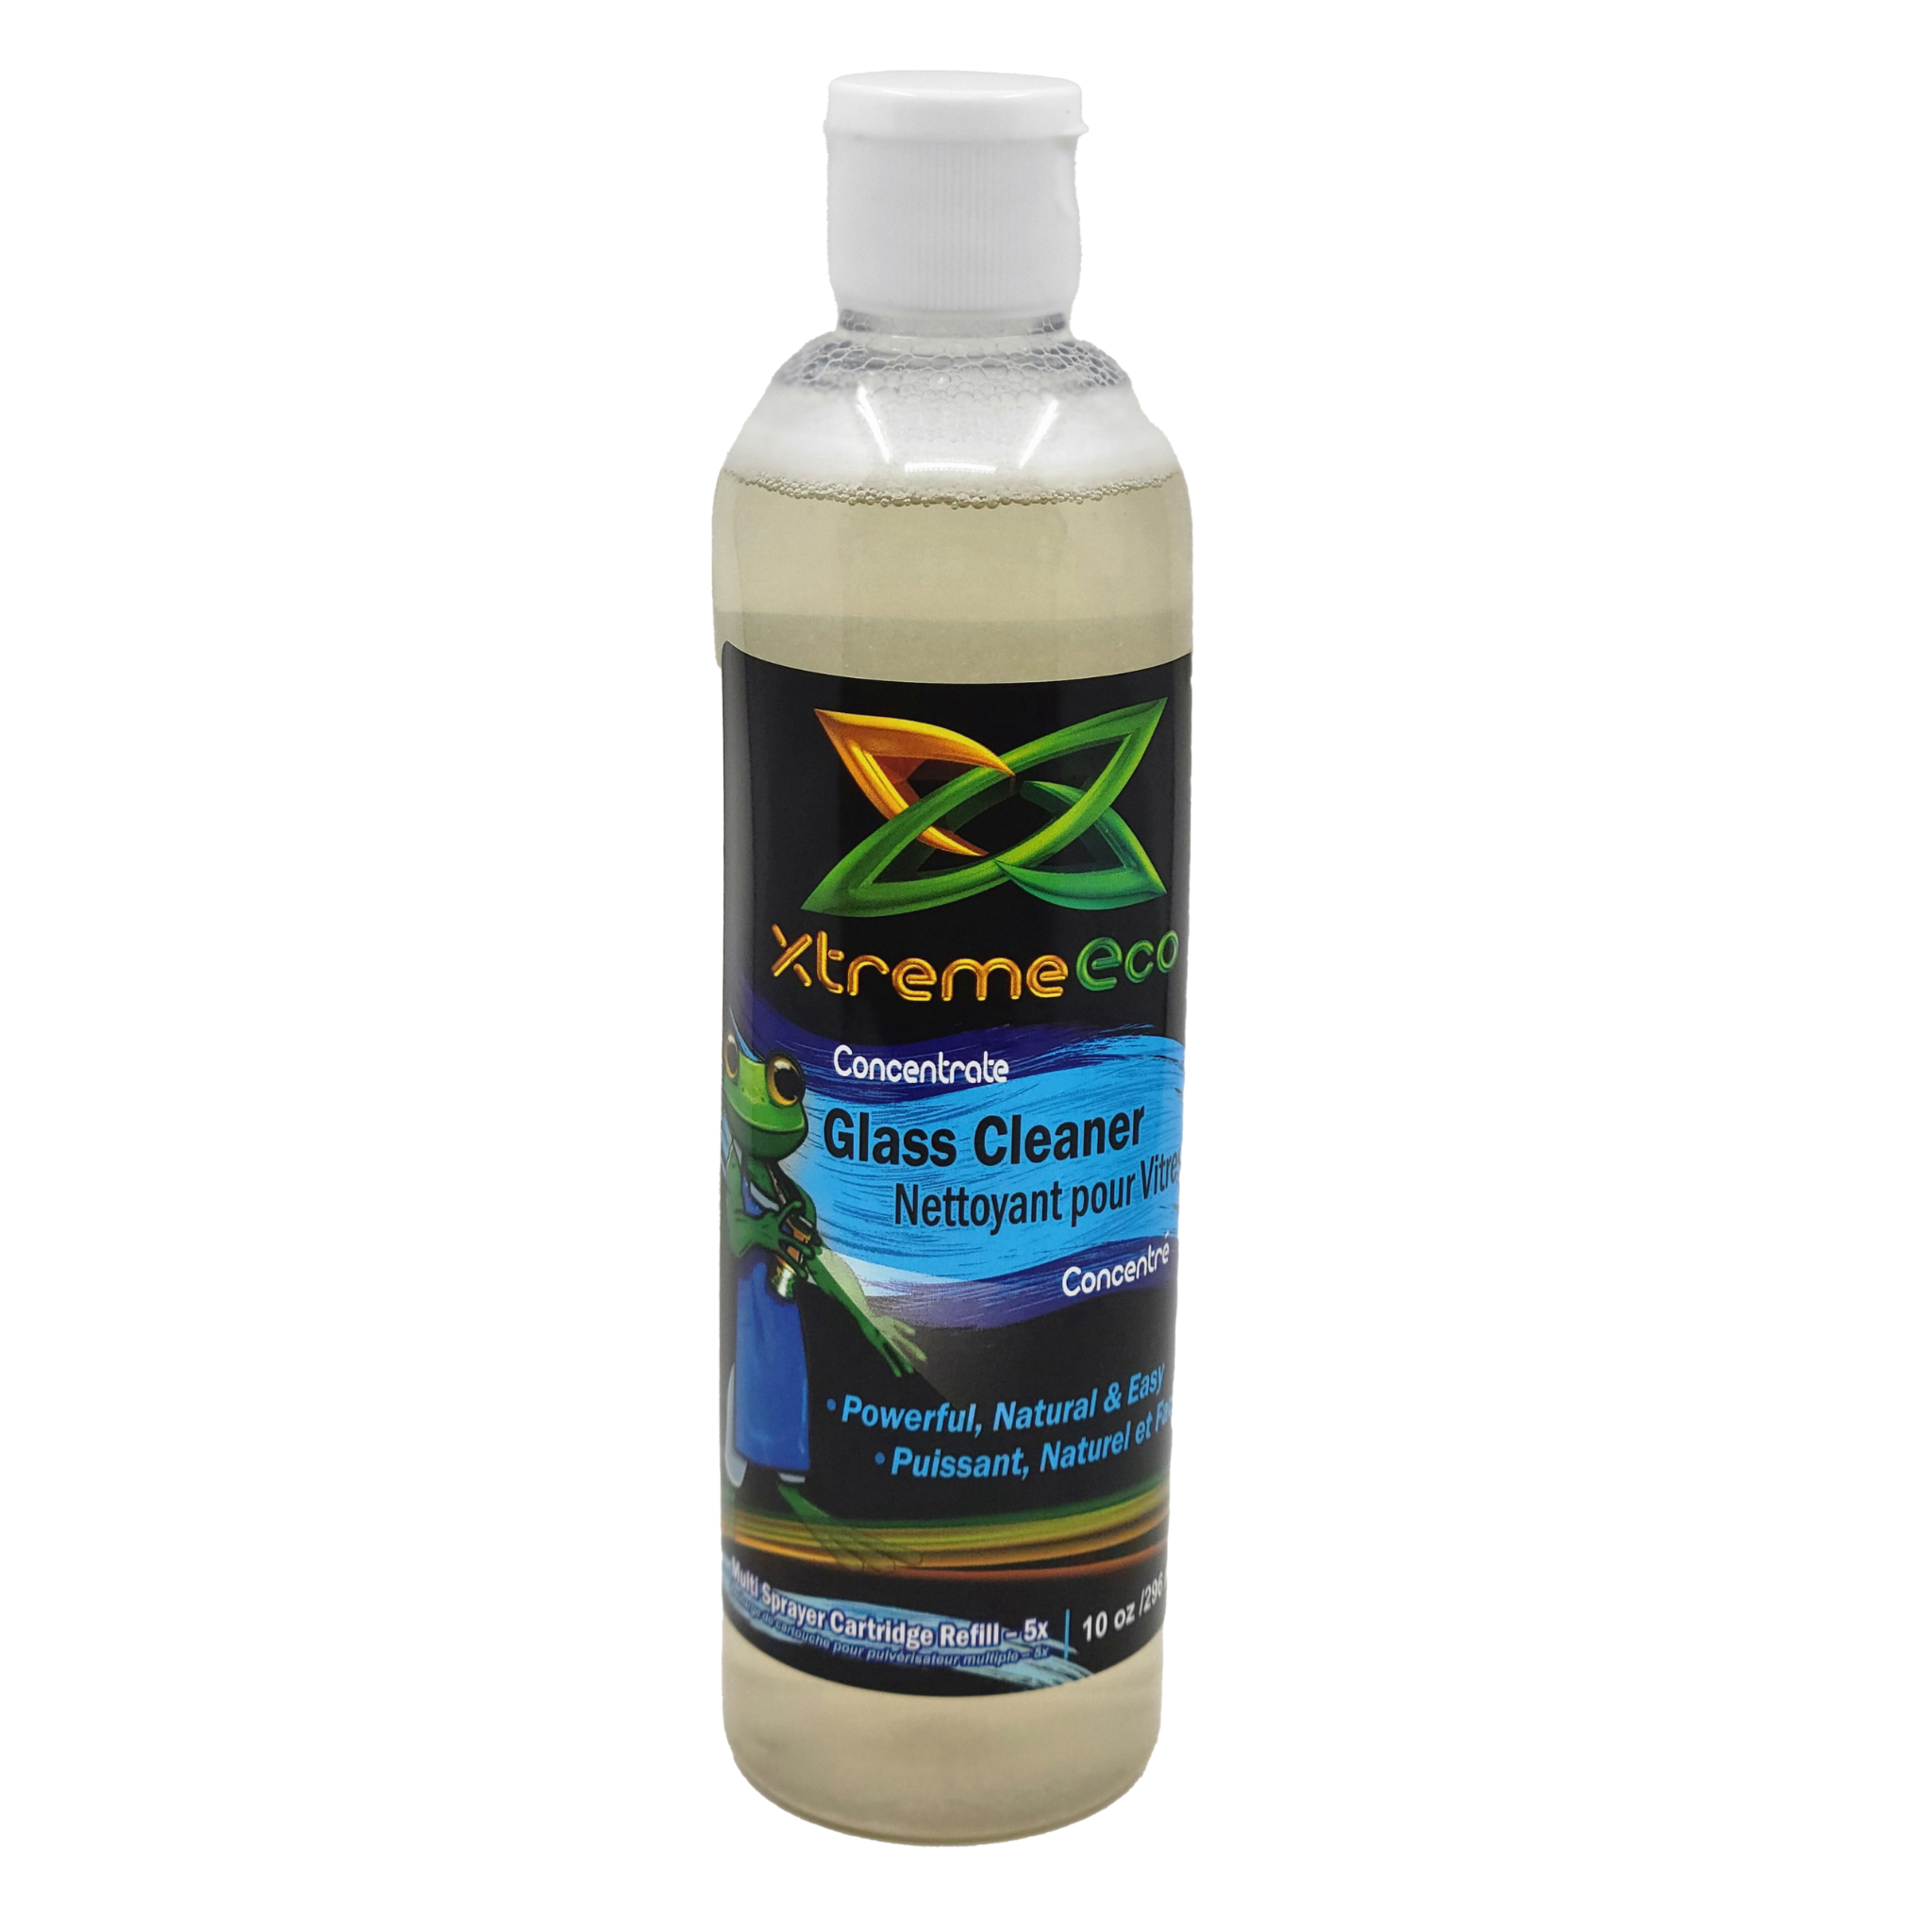 Xtreme Eco Glass Cleaner Concentrate INFO ONLY